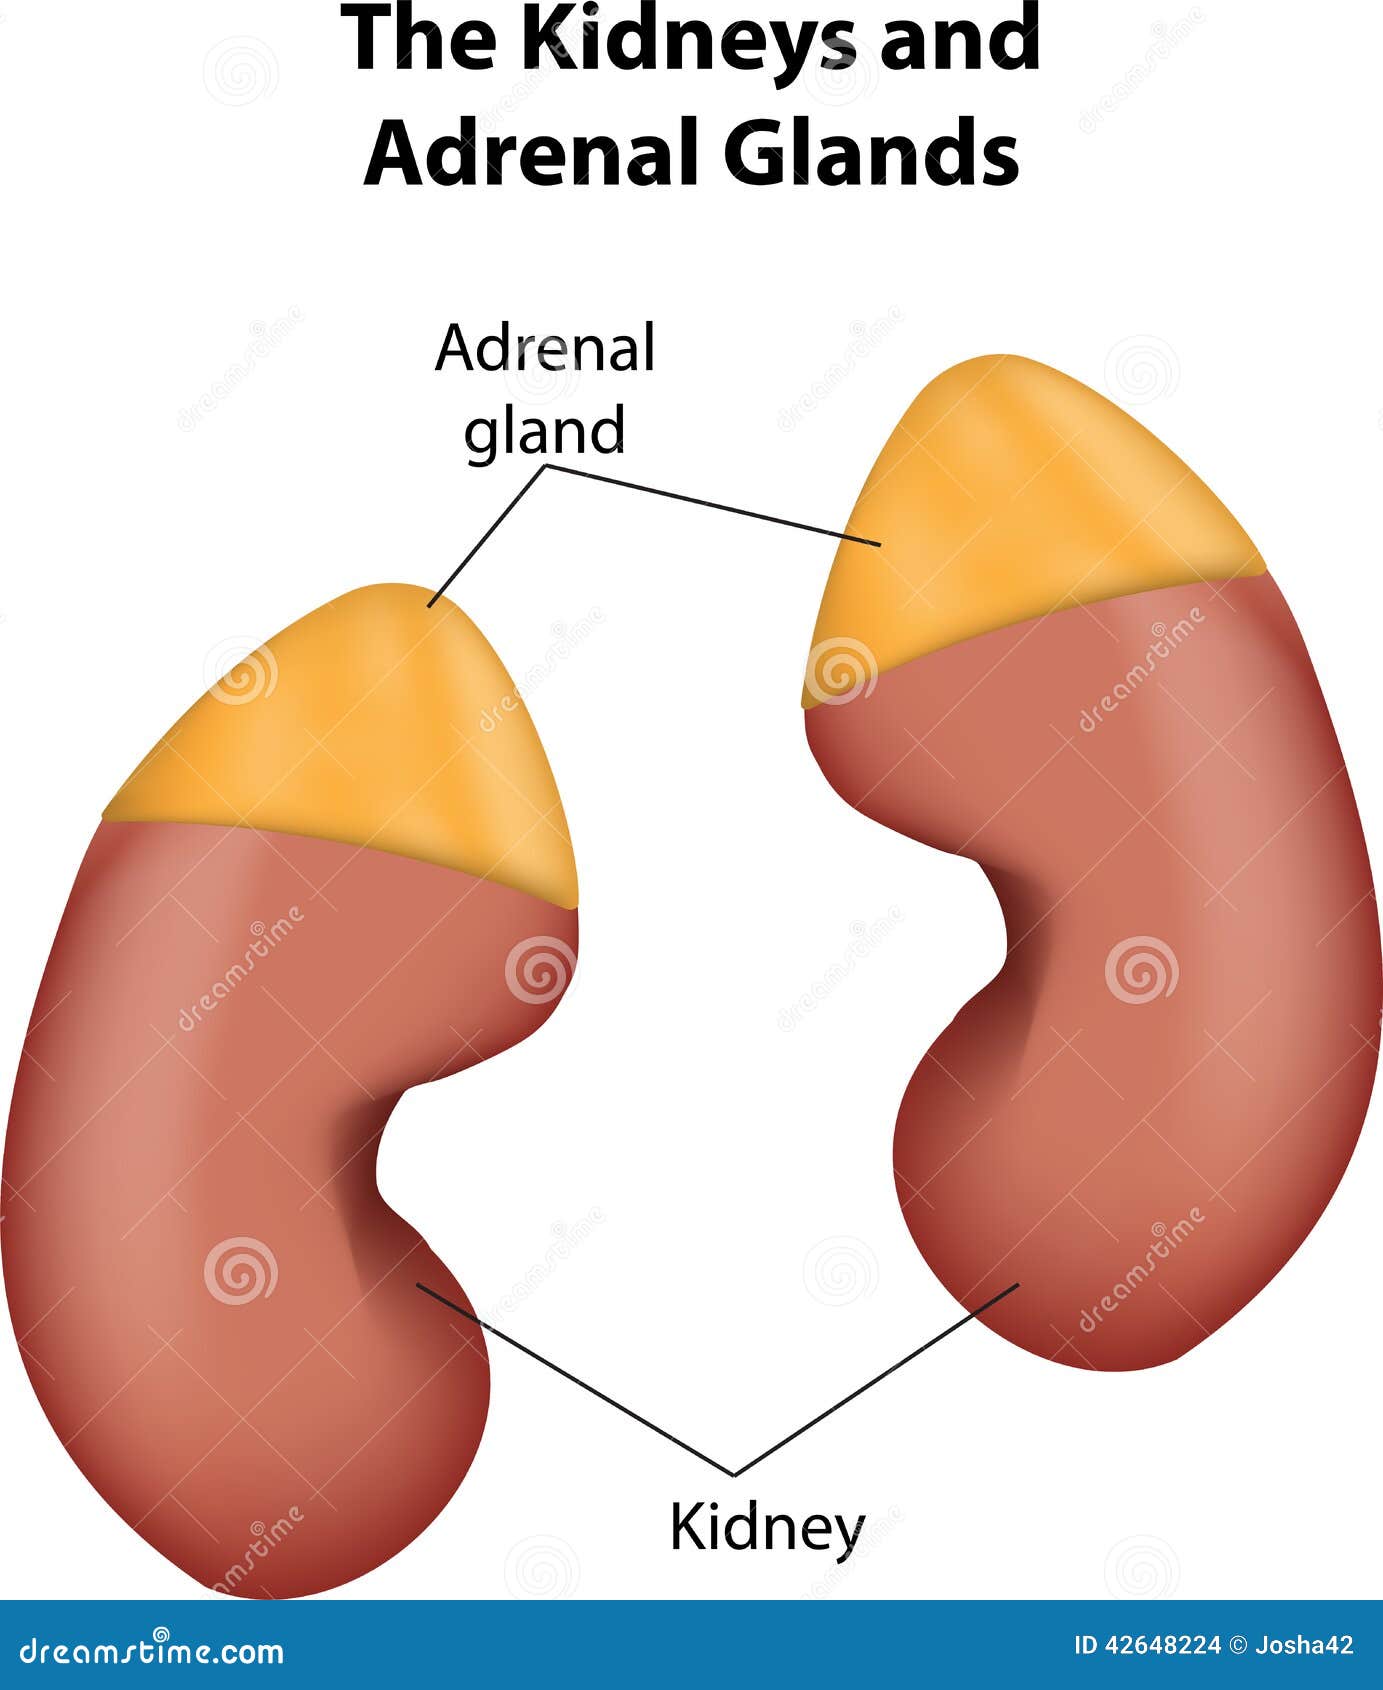 the kidneys and adrenal glands